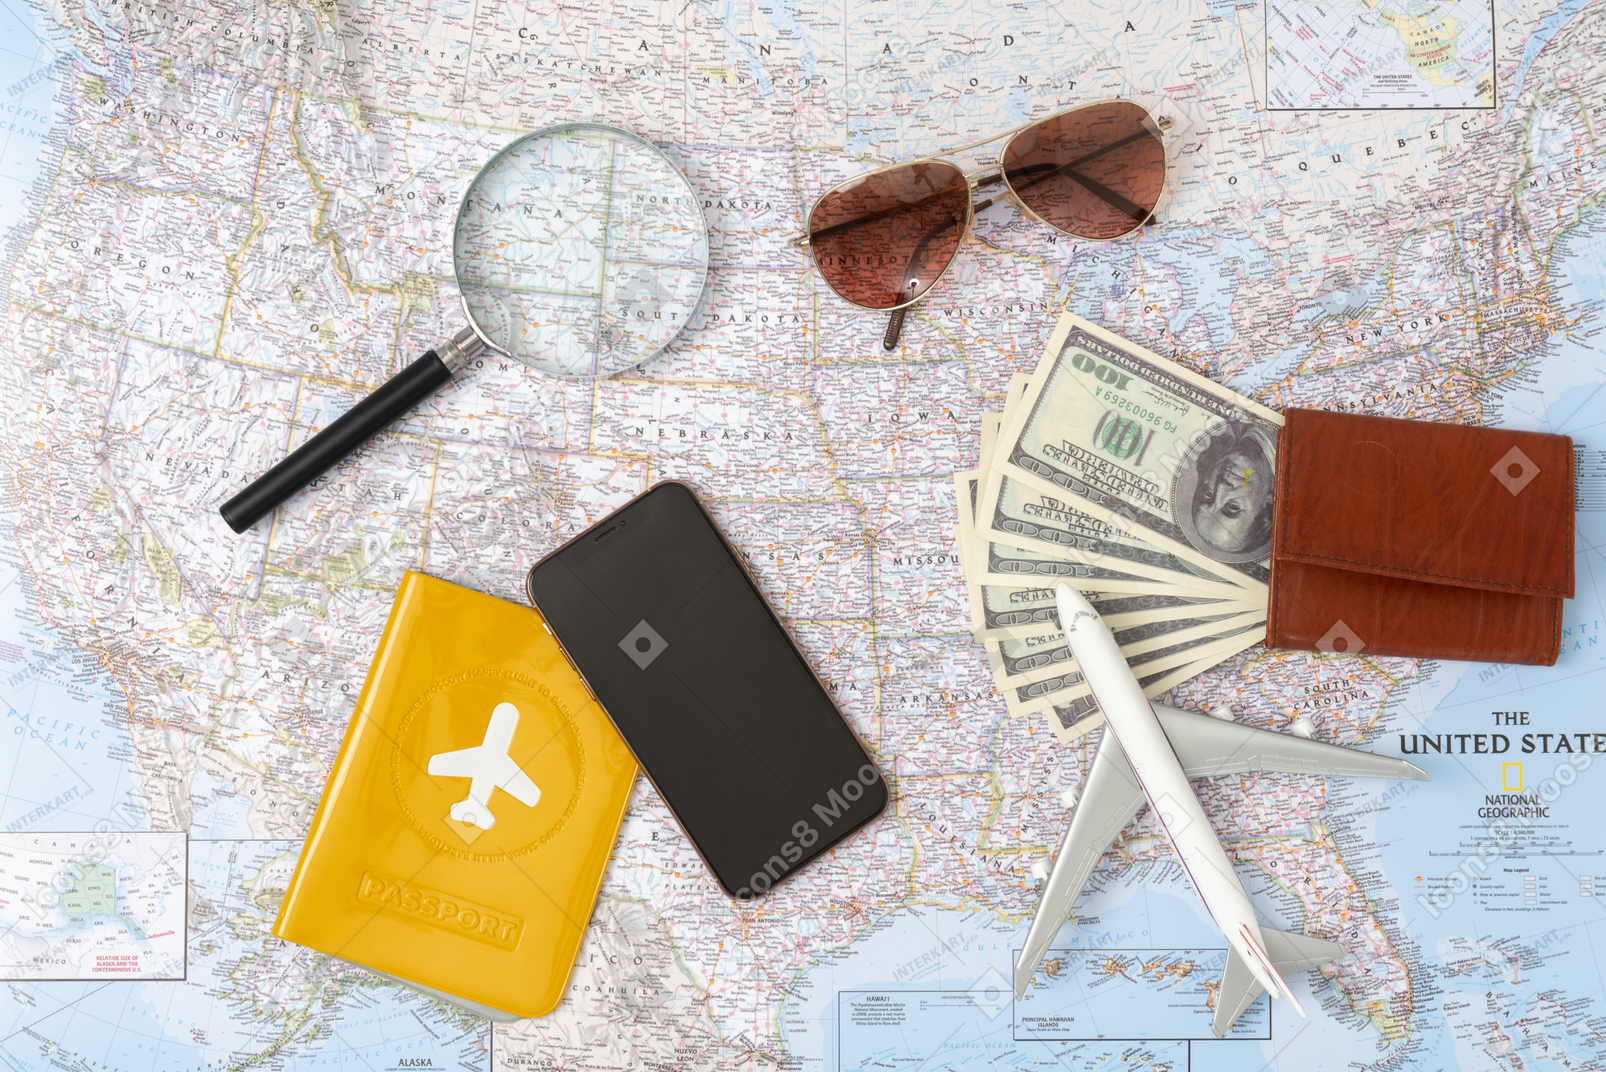 Grab your phone, shades and a passport. and don't forget the cash, there are no atms at where we are going